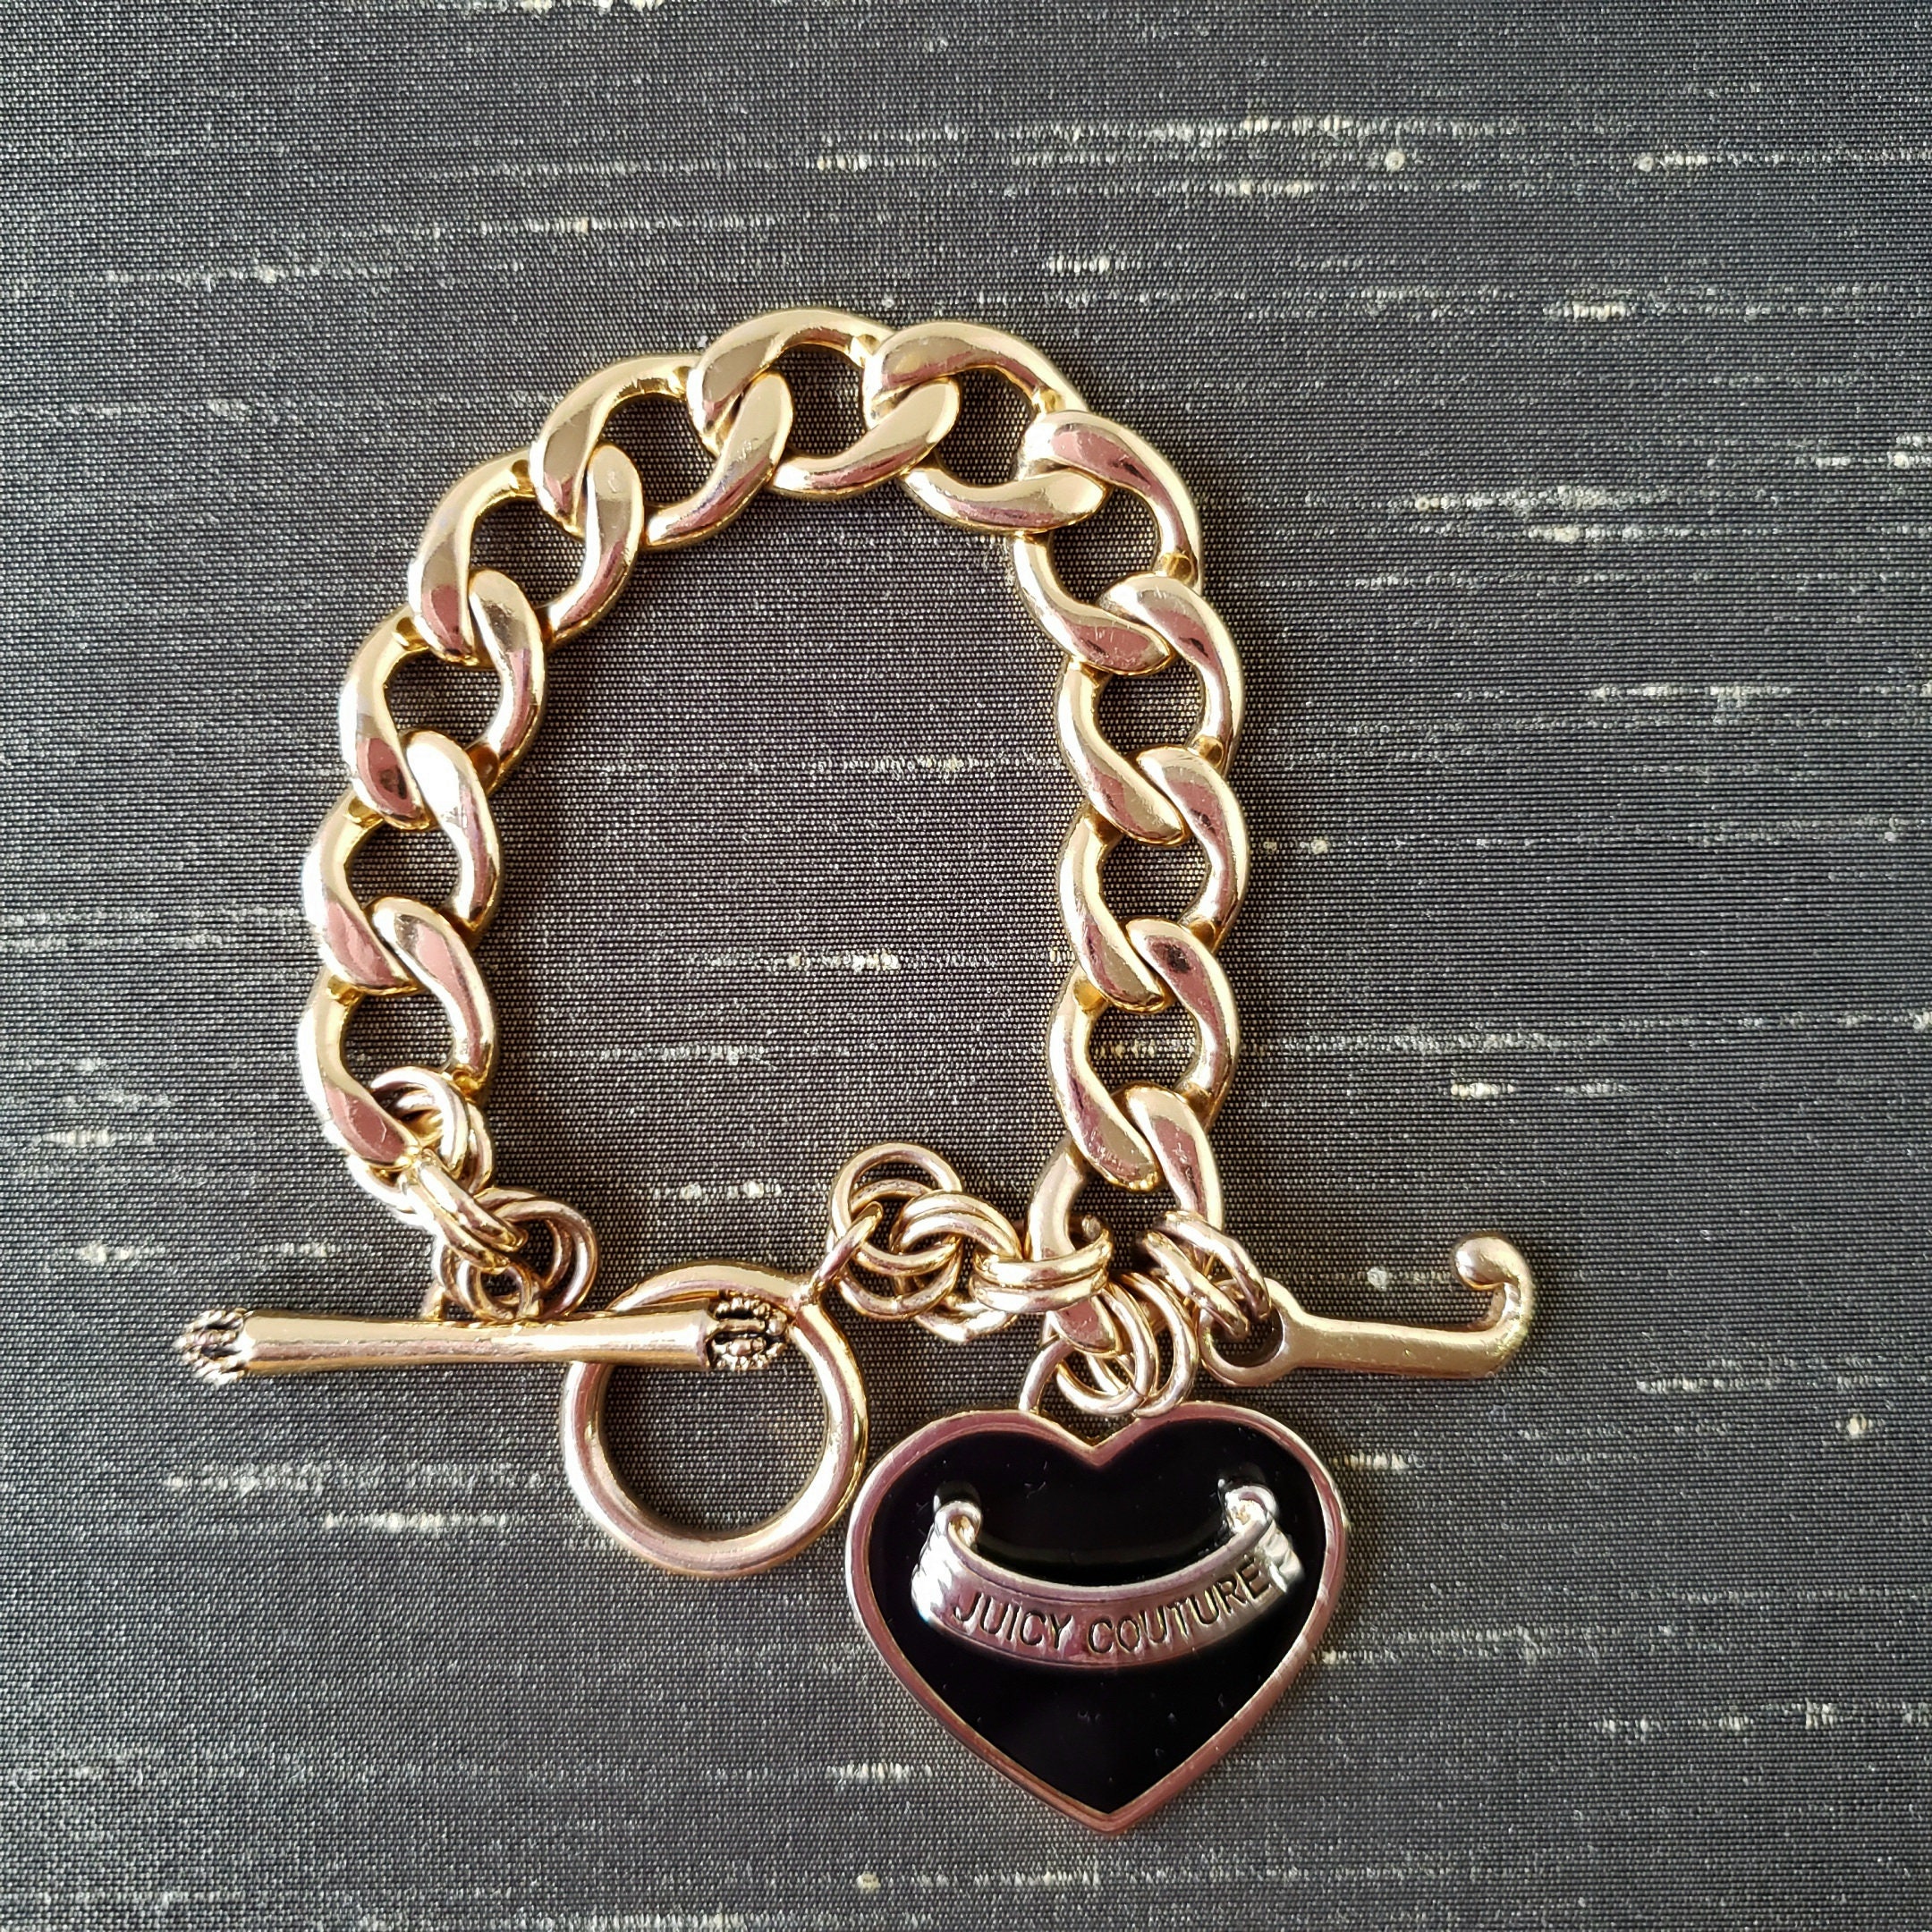 100% Authentic Juicy Couture Gold Heart And Black Bracelet